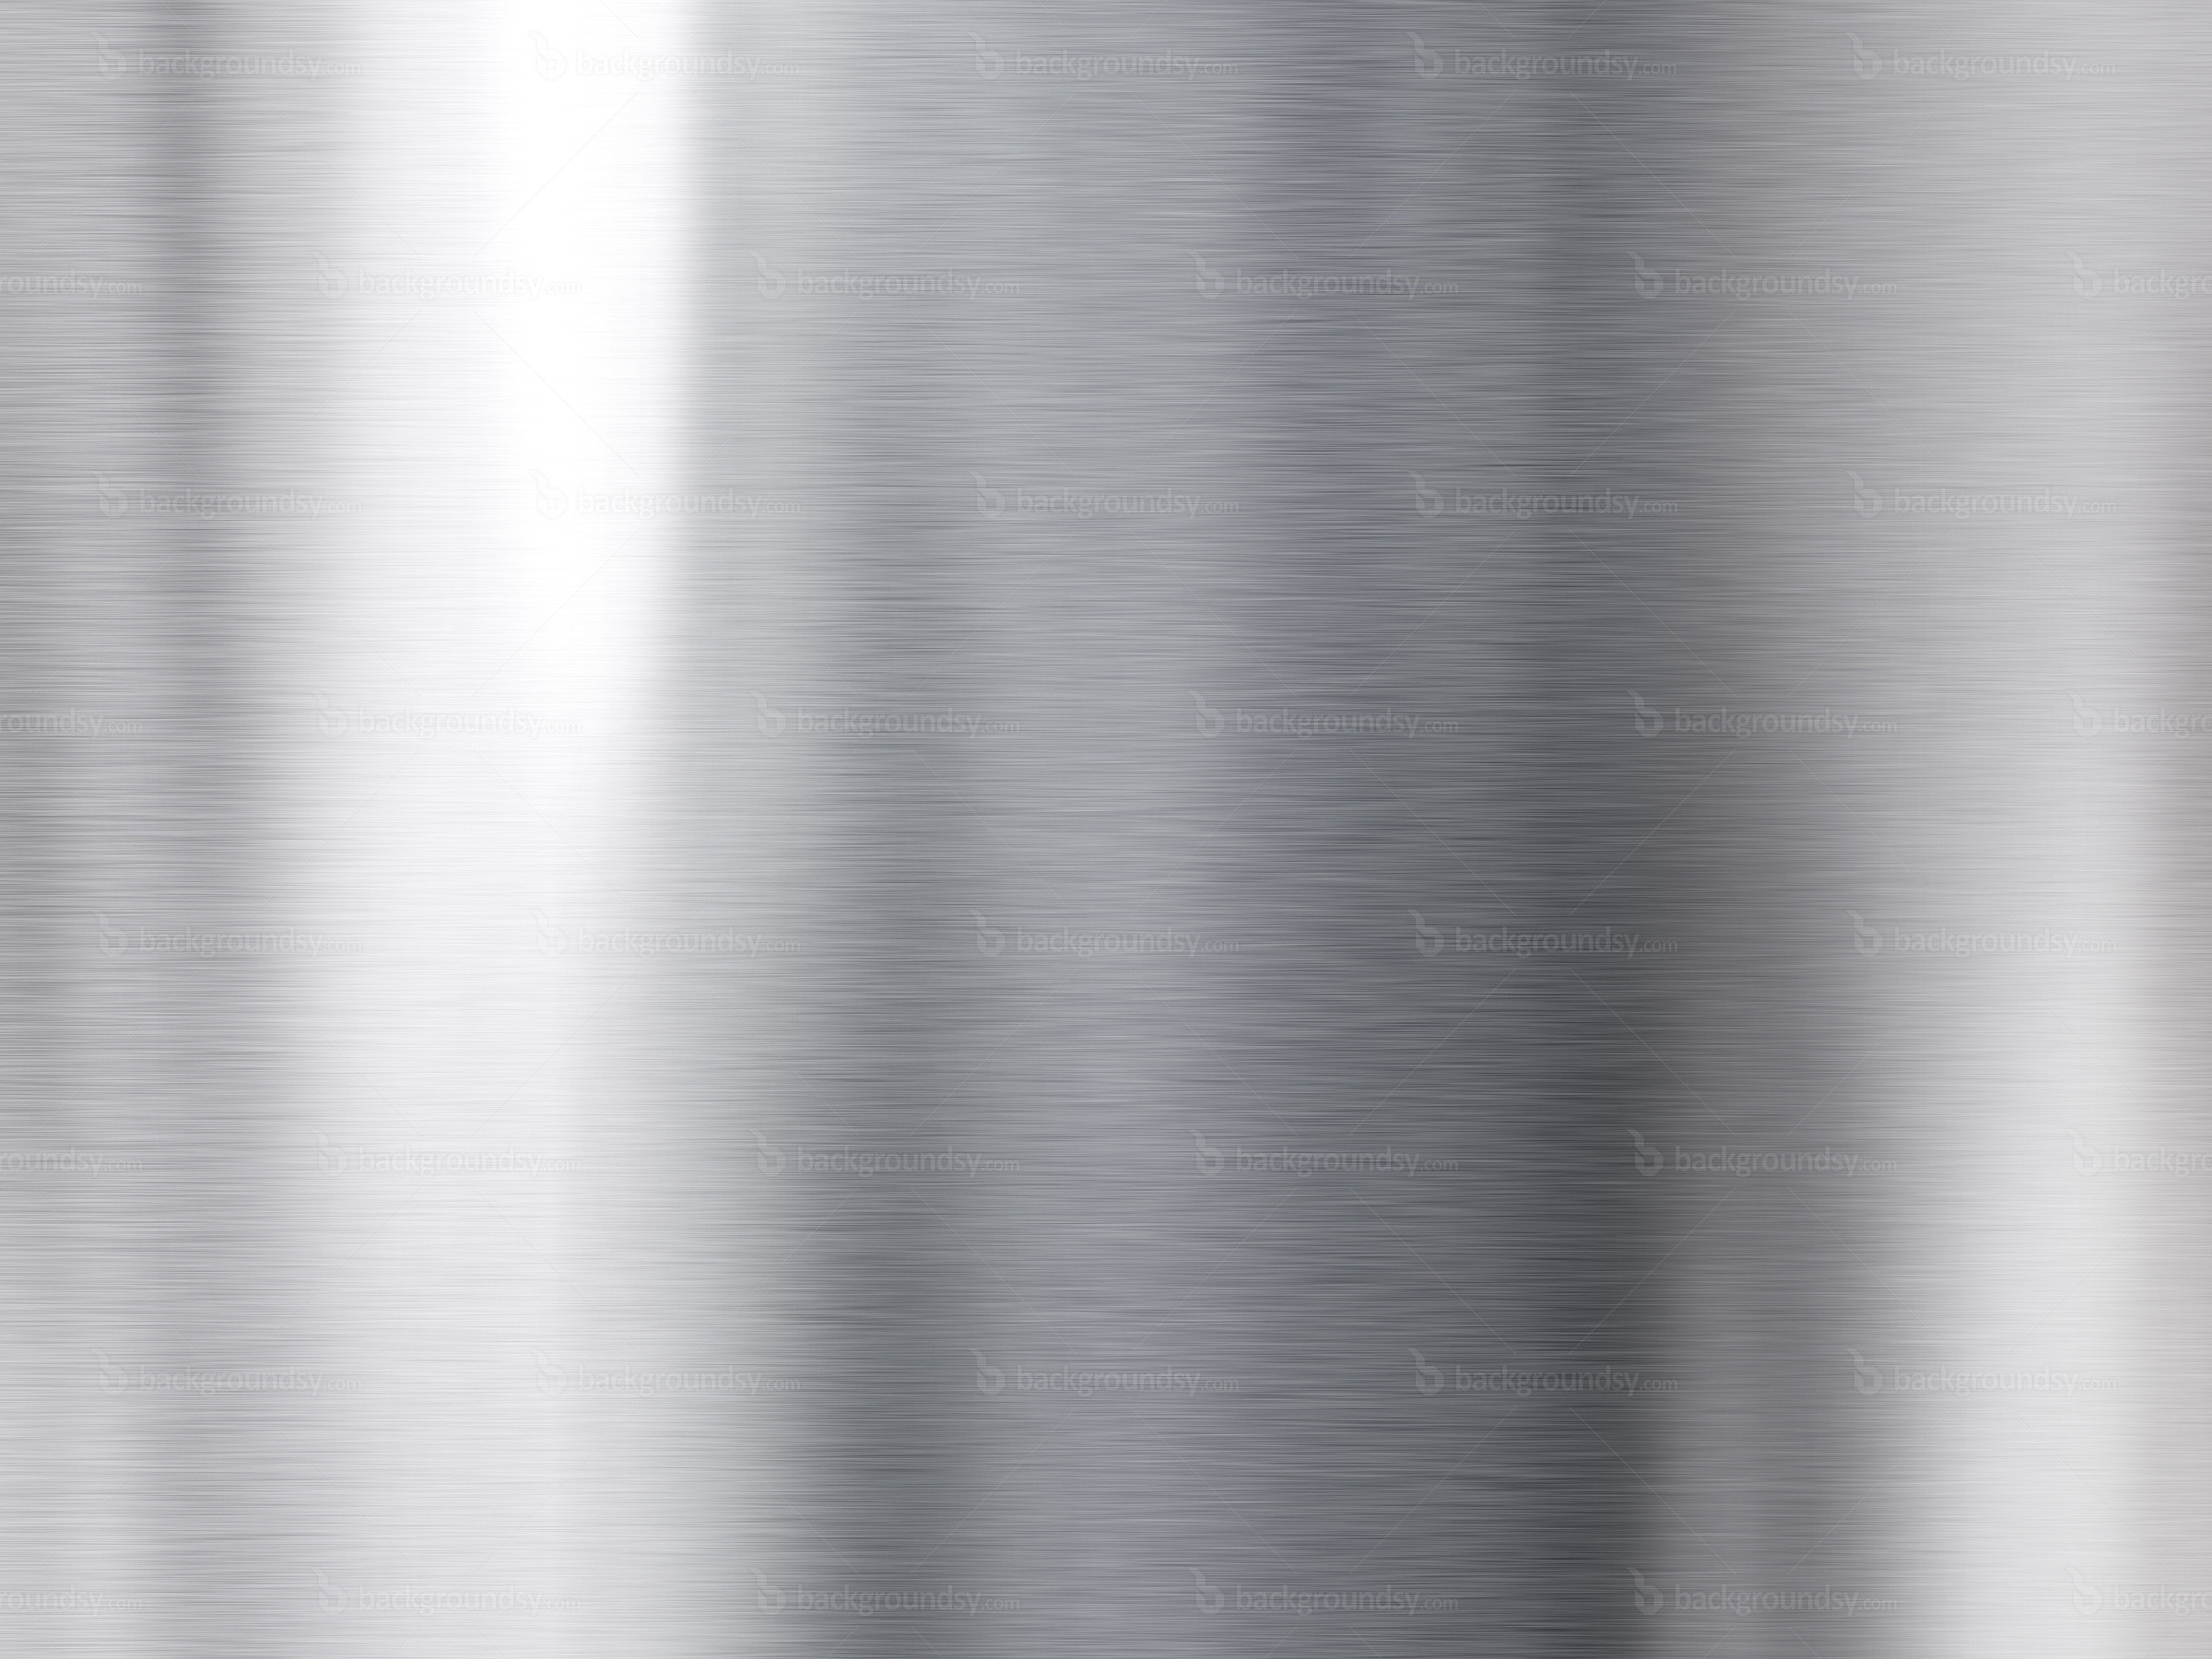 2400x1800 colour inspiration: Shiny metal silver, stainless steel | Are .